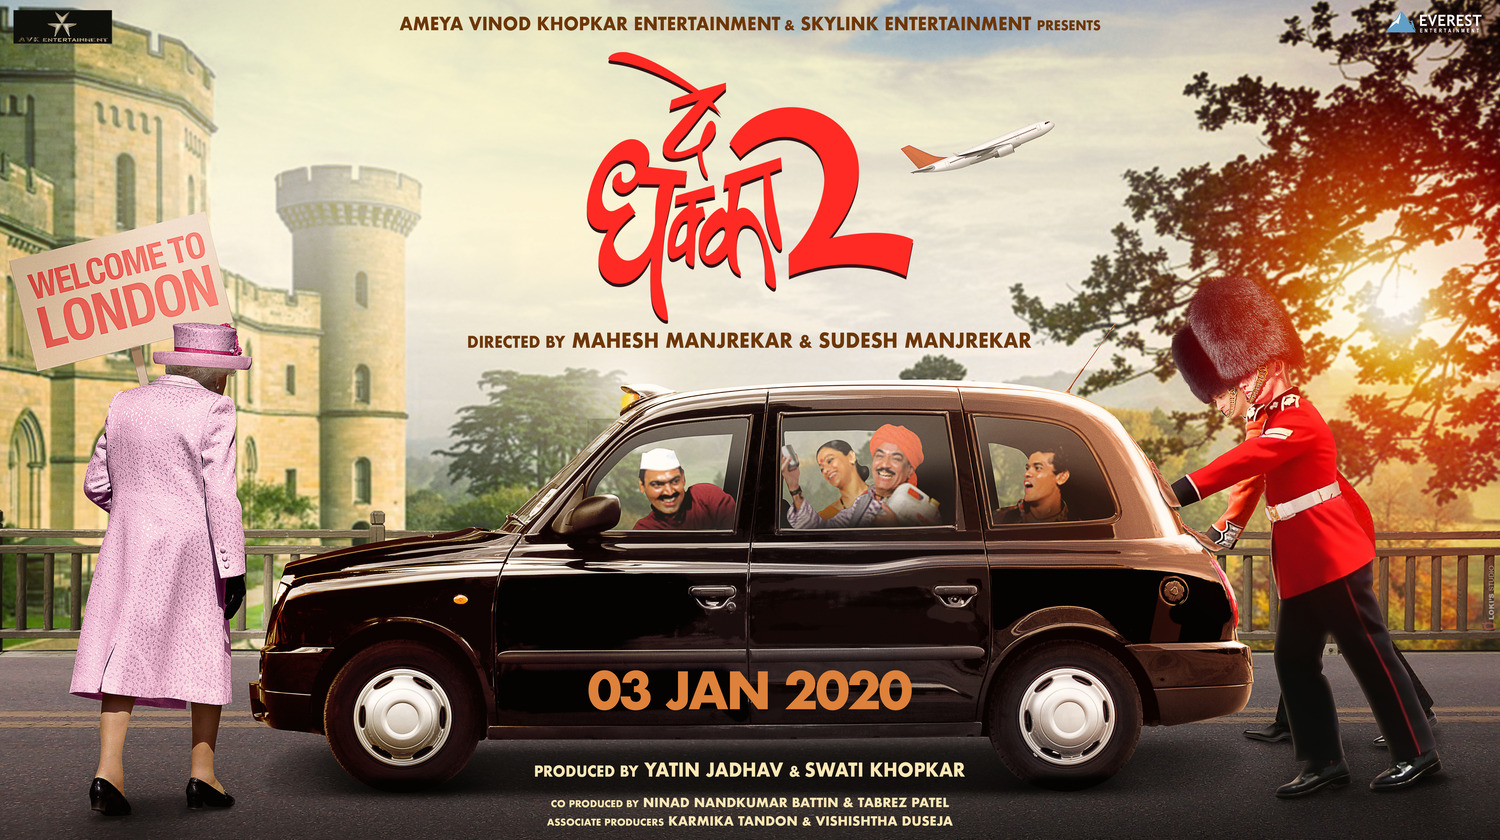 Extra Large Movie Poster Image for De Dhakka 2 